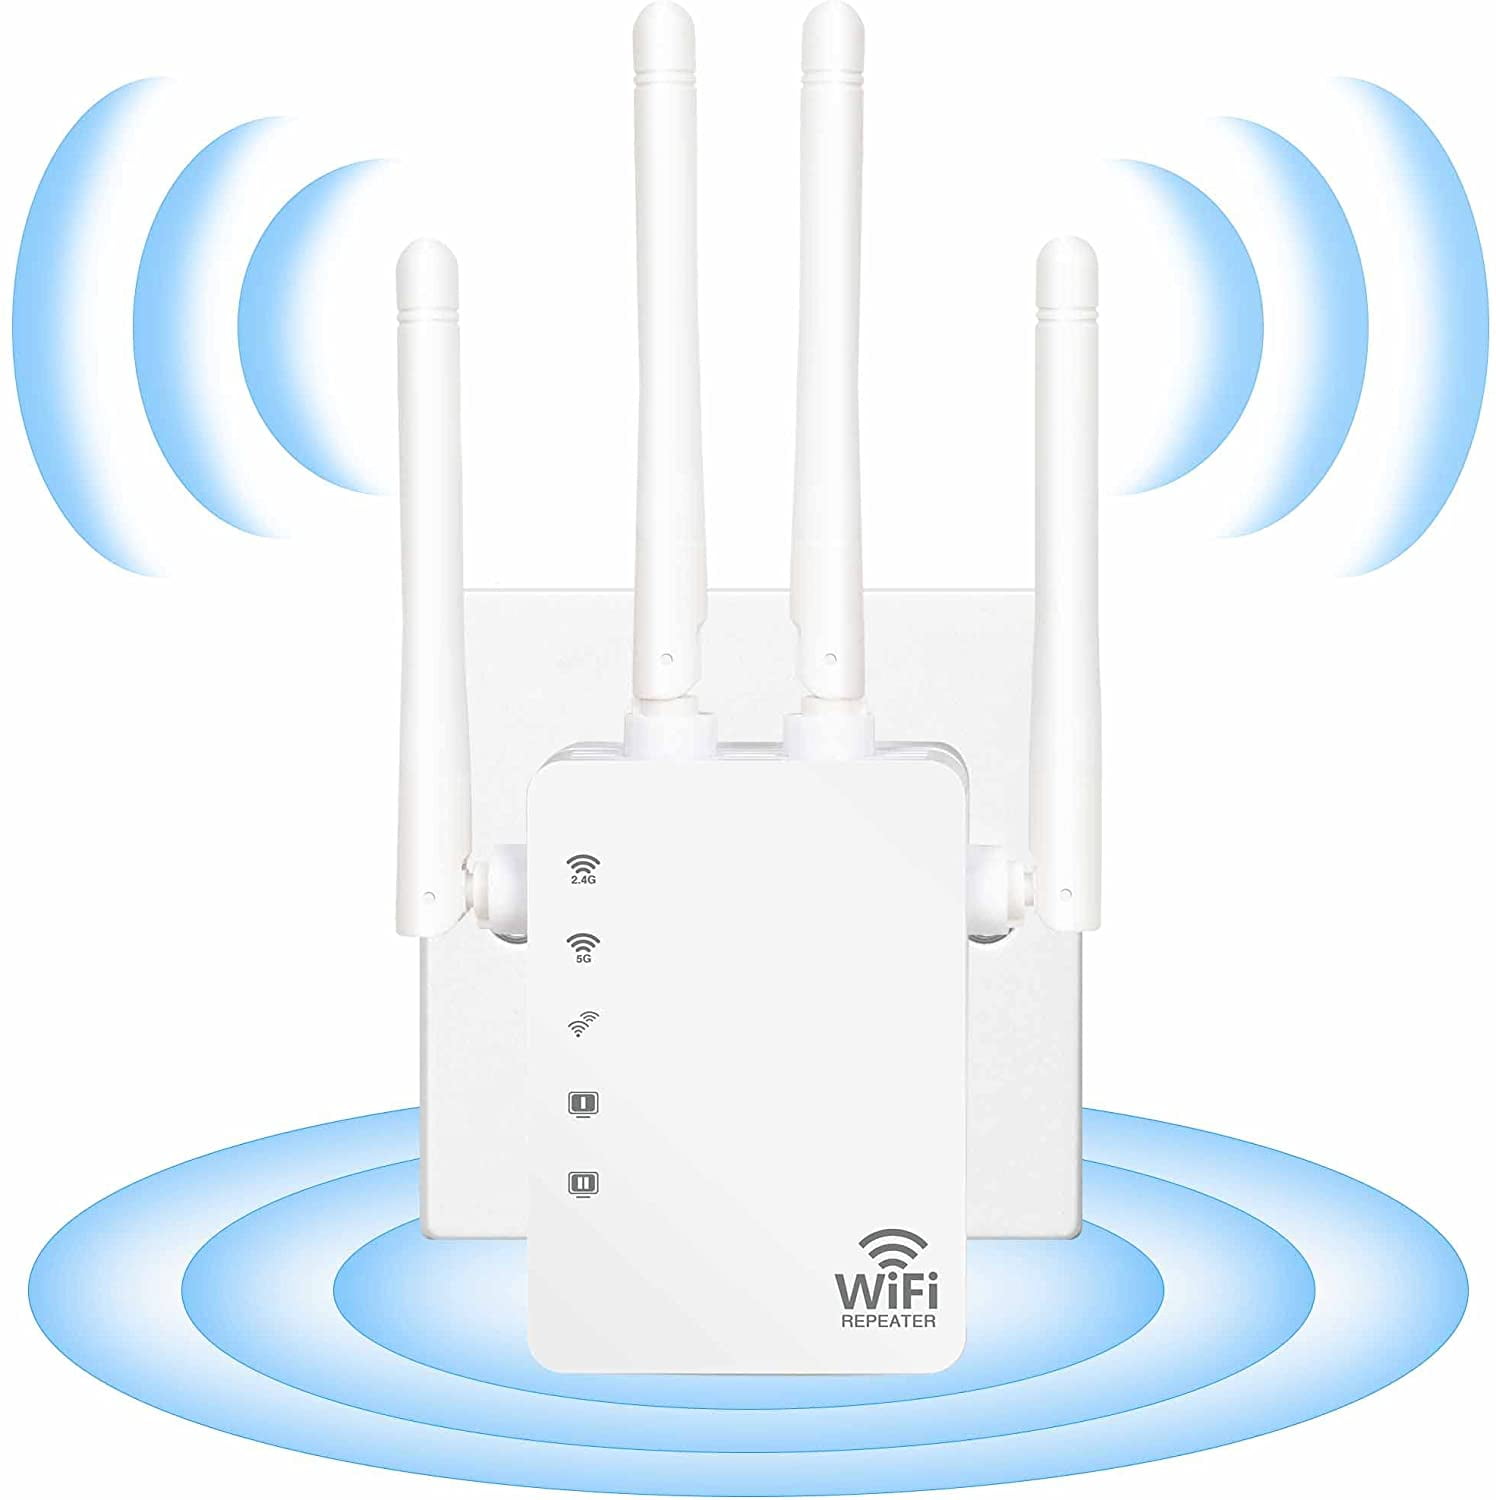 Wireless Signal Booster with WPS Quick Connection,WiFi Repeater & Internet Booster for Home. 2.4 & 5GHz Dual Band,Covers Up to 3000 Sq.ft and 35 Devices WiFi Extender 1200Mbps 